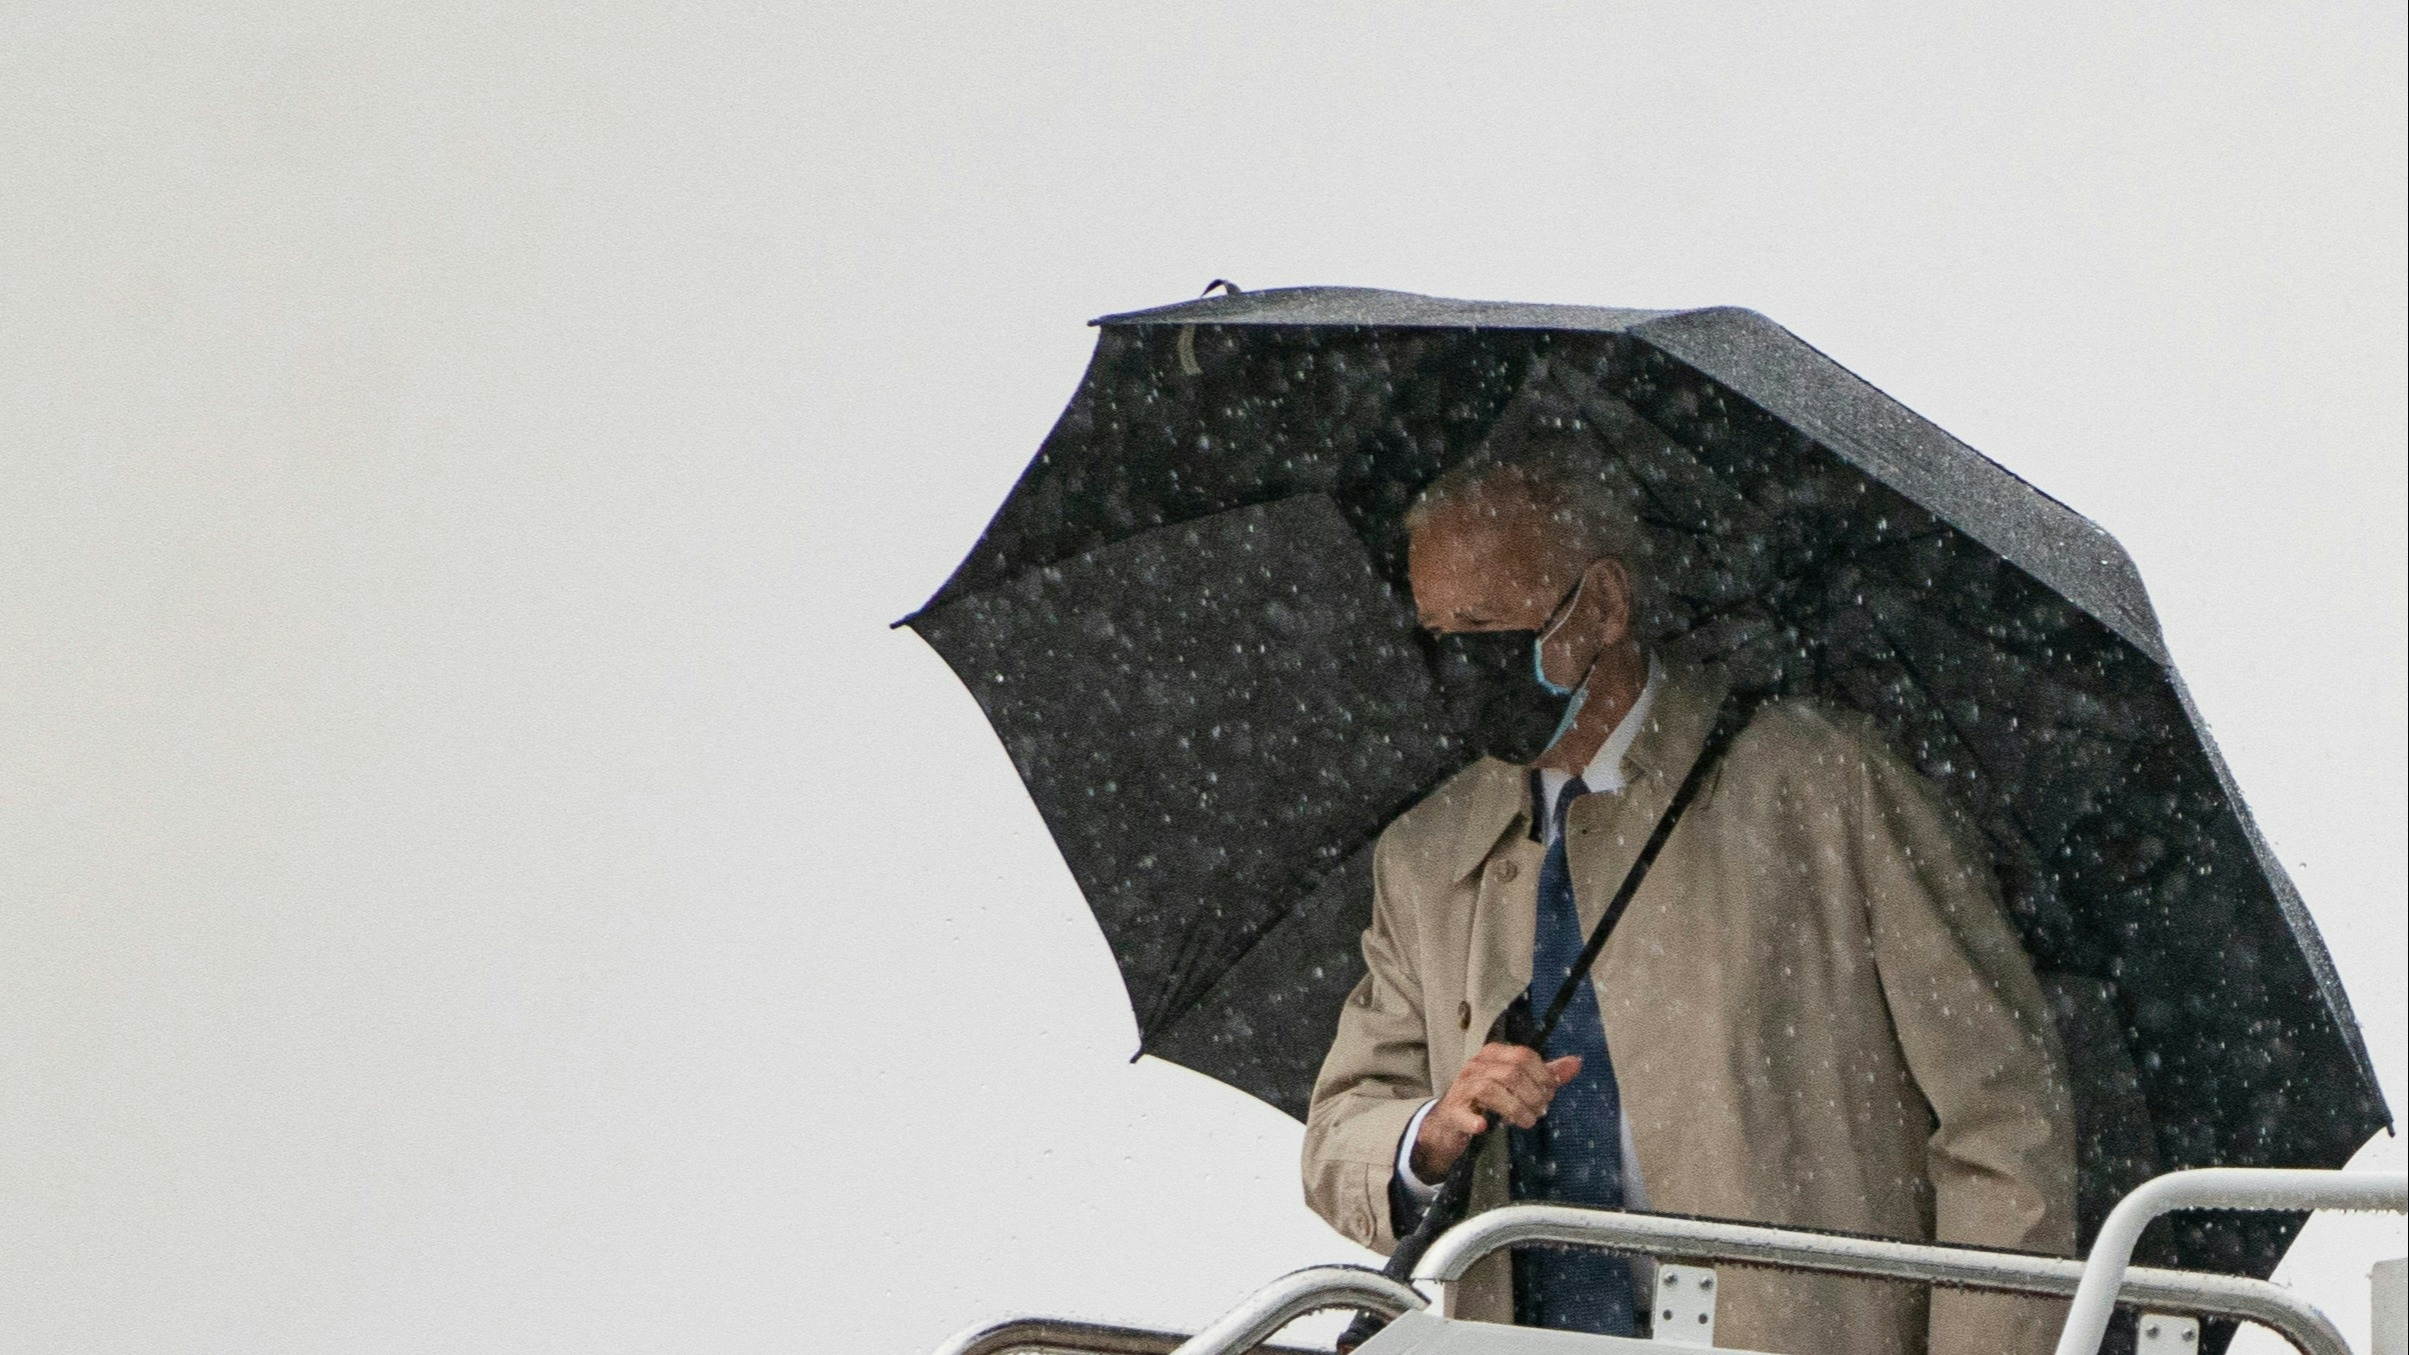 US President Joe Biden boards Air Force One in the rain at Andrews Air Force Base on March 31, 2021 in Maryland.